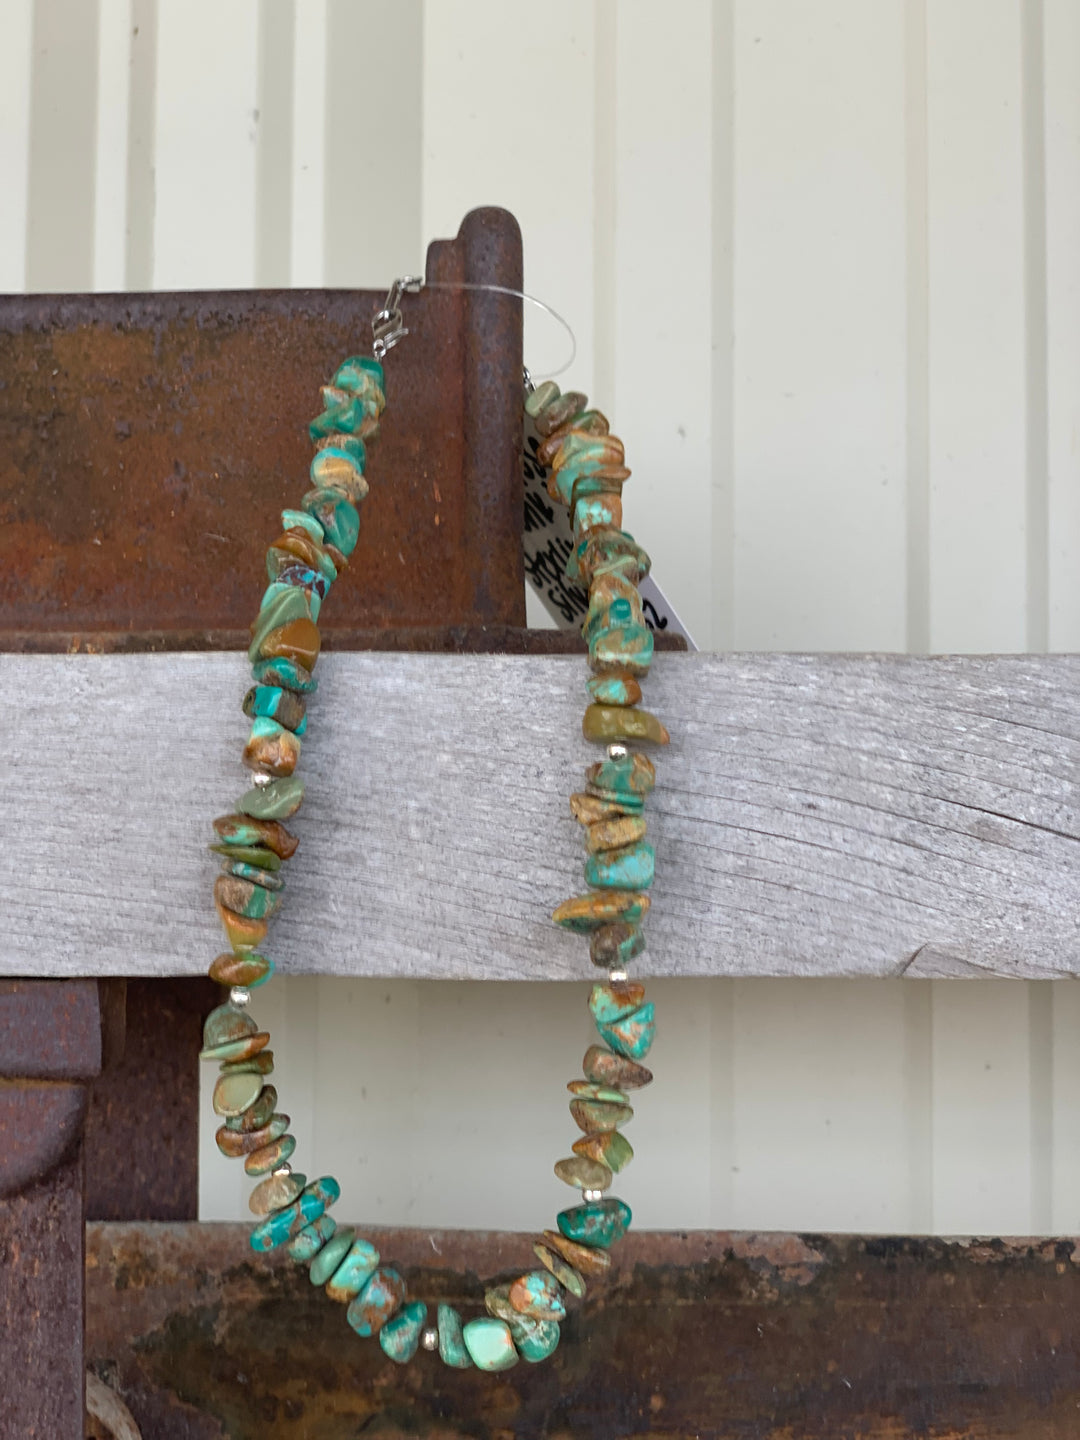 Rustic Rose Jewelry | #132 Turquoise Chunk / Sterling Silver Bead Necklace